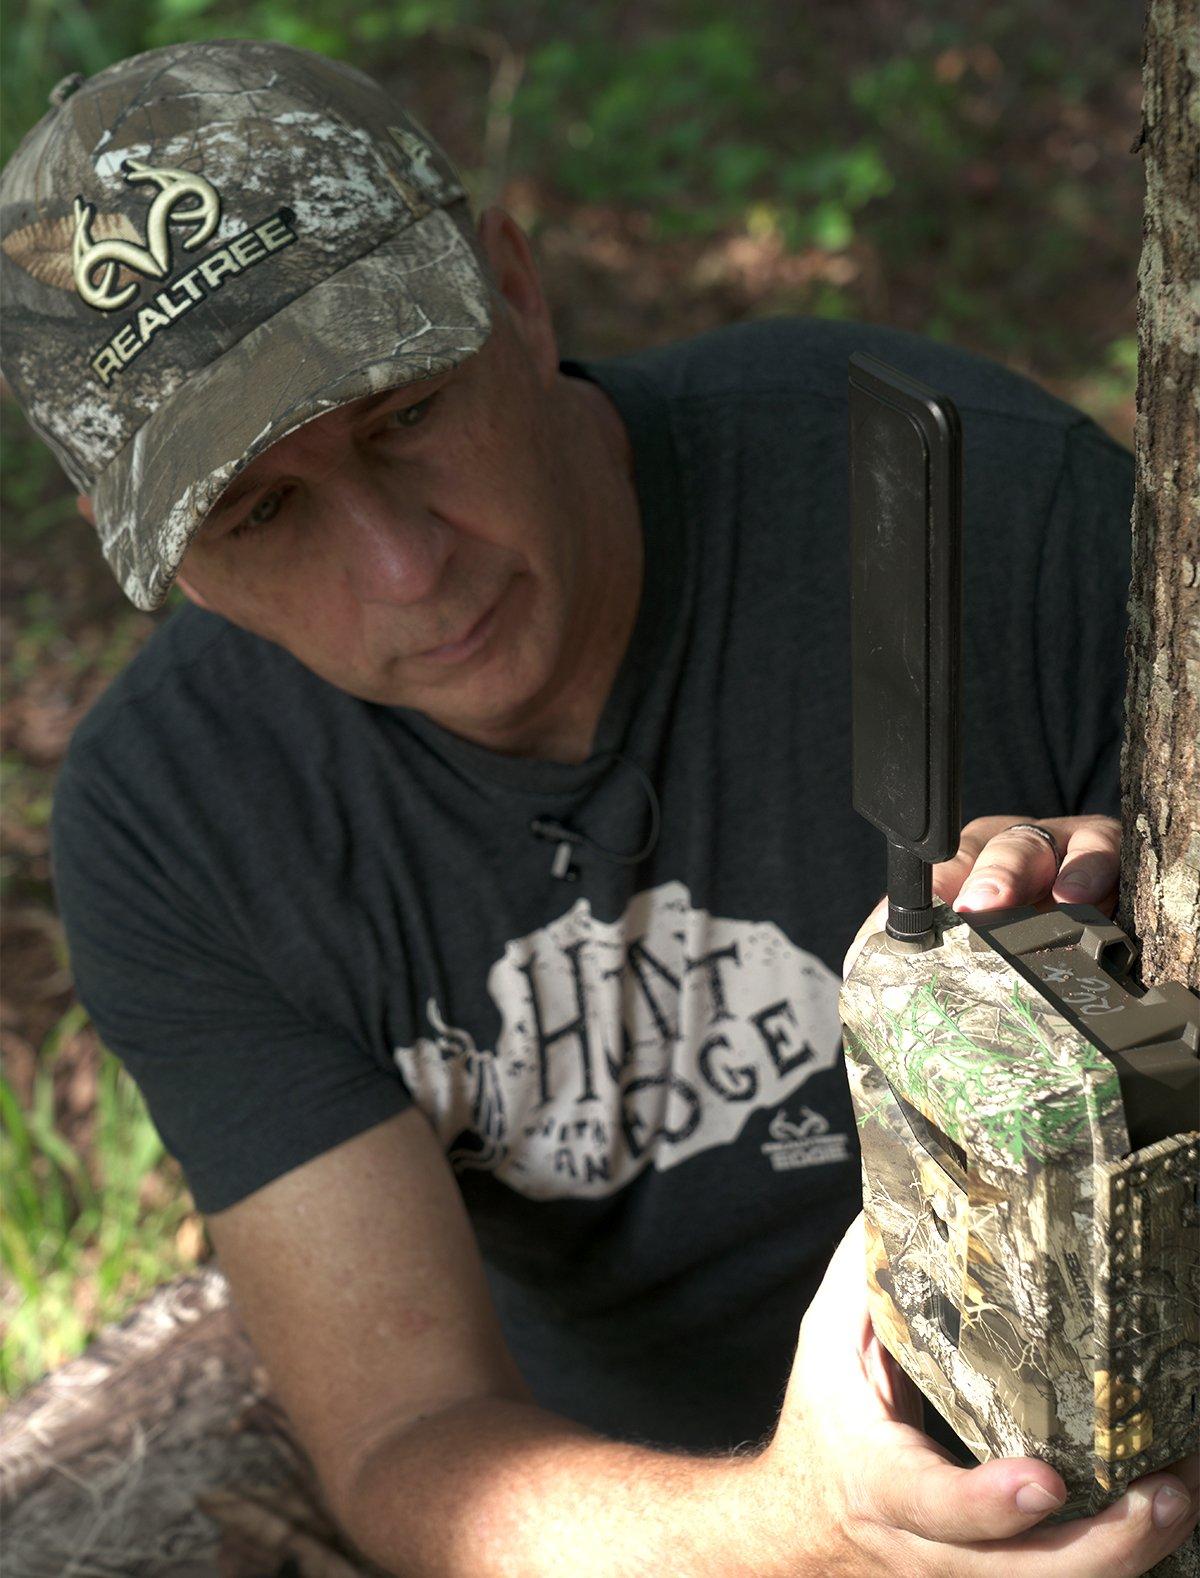 Location is an extremely important element. A few yards can make all the difference. Image by Realtree